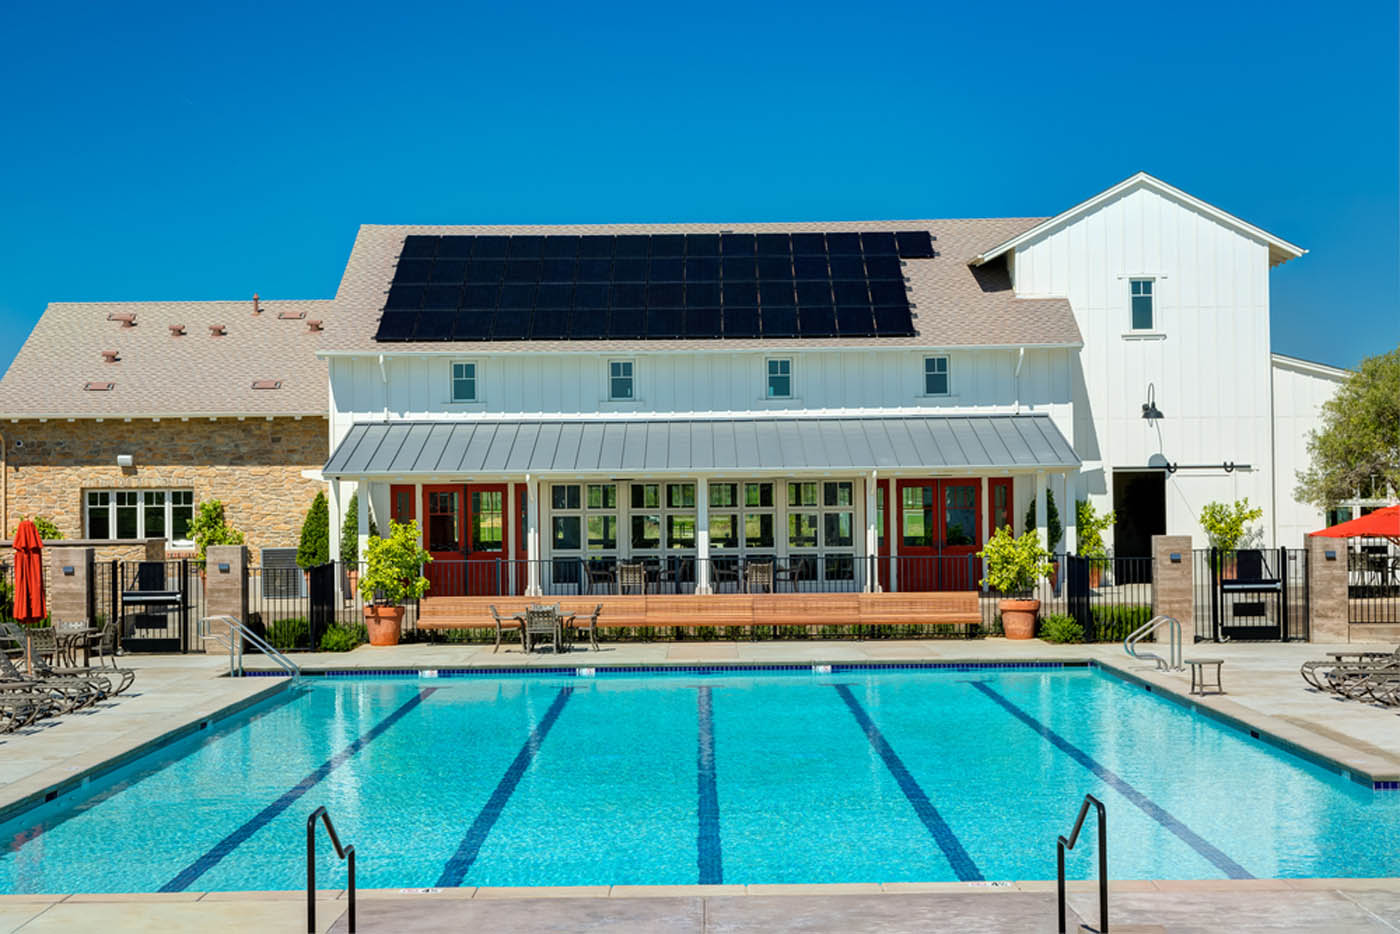 A large house with solar panels on the roof and a pool in the backyard.